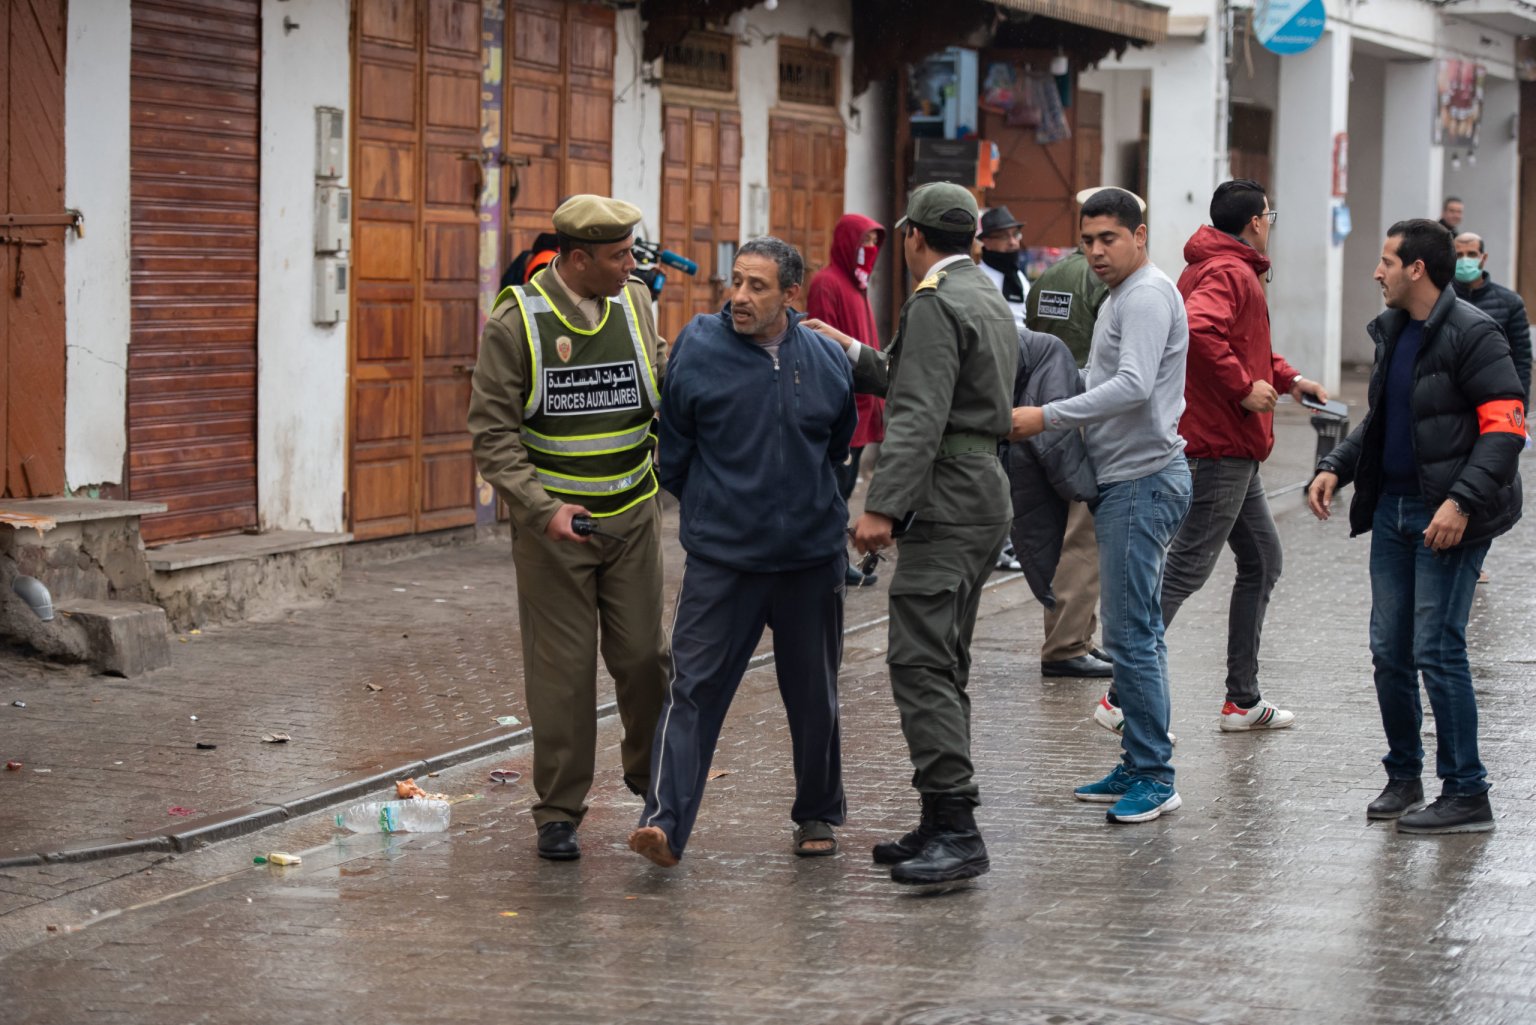 Security forces order to stay home to people after state of emergency declaration as a precaution against the pandemic in Rabat, Morocco 20 March 2020 (Anadolu Agency)